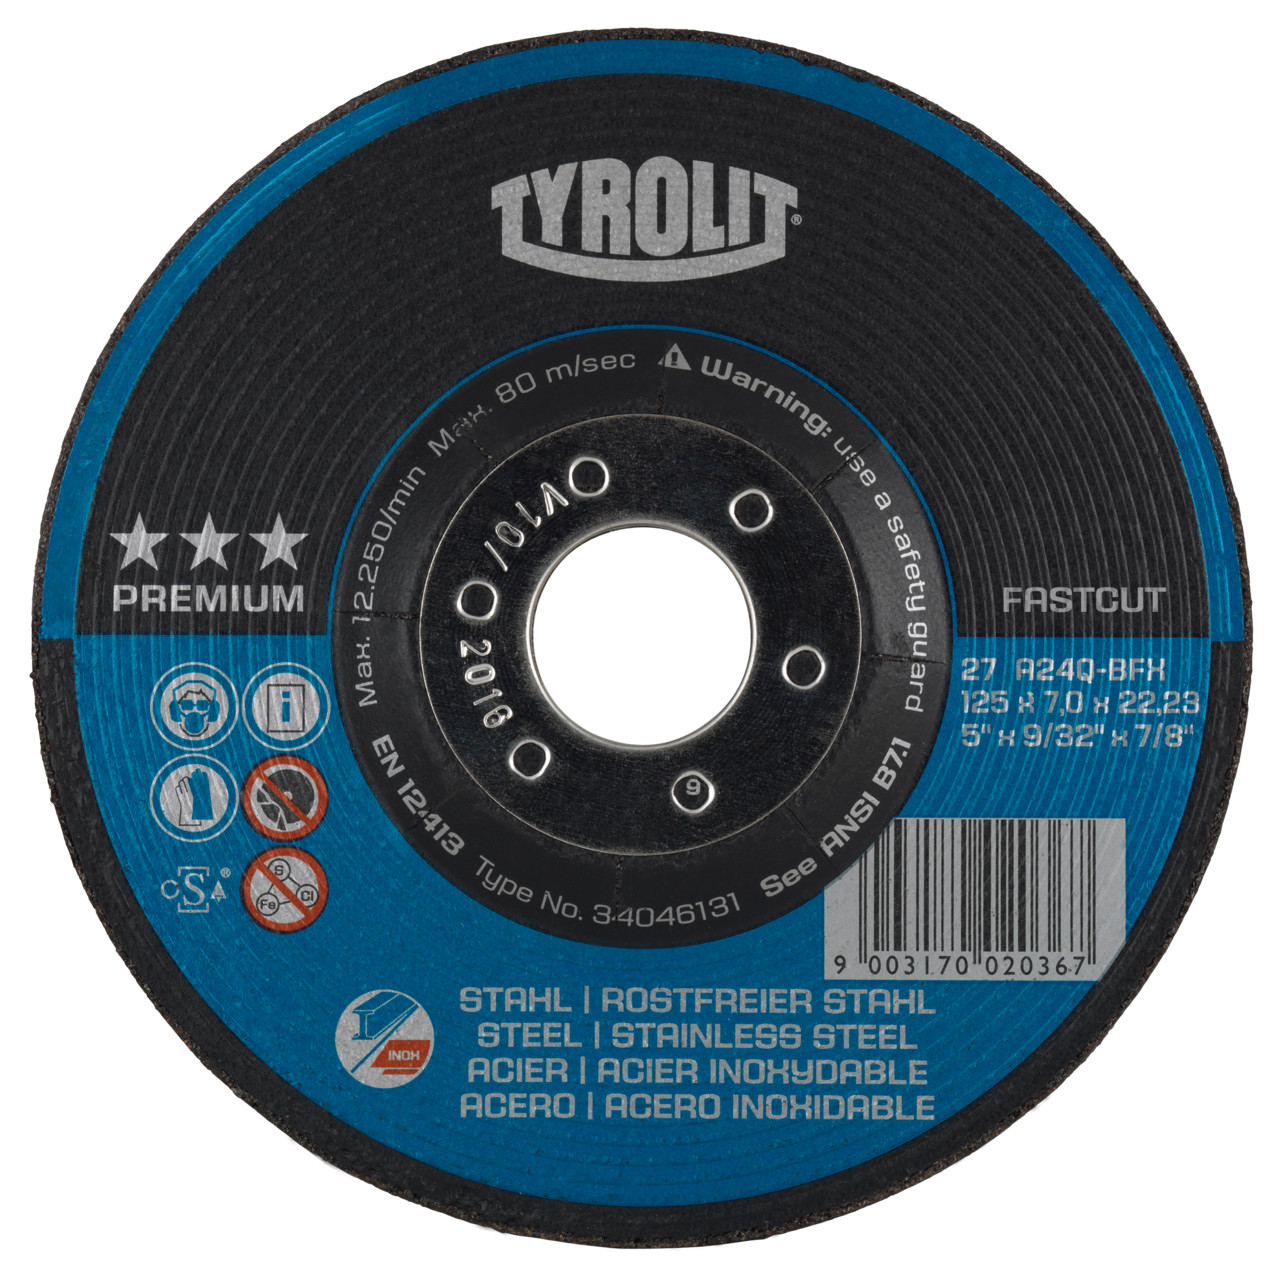 Tyrolit Roughing disc DxUxH 115x7x22.23 FASTCUT for steel and stainless steel, shape: 27 - offset version, Art. 5293